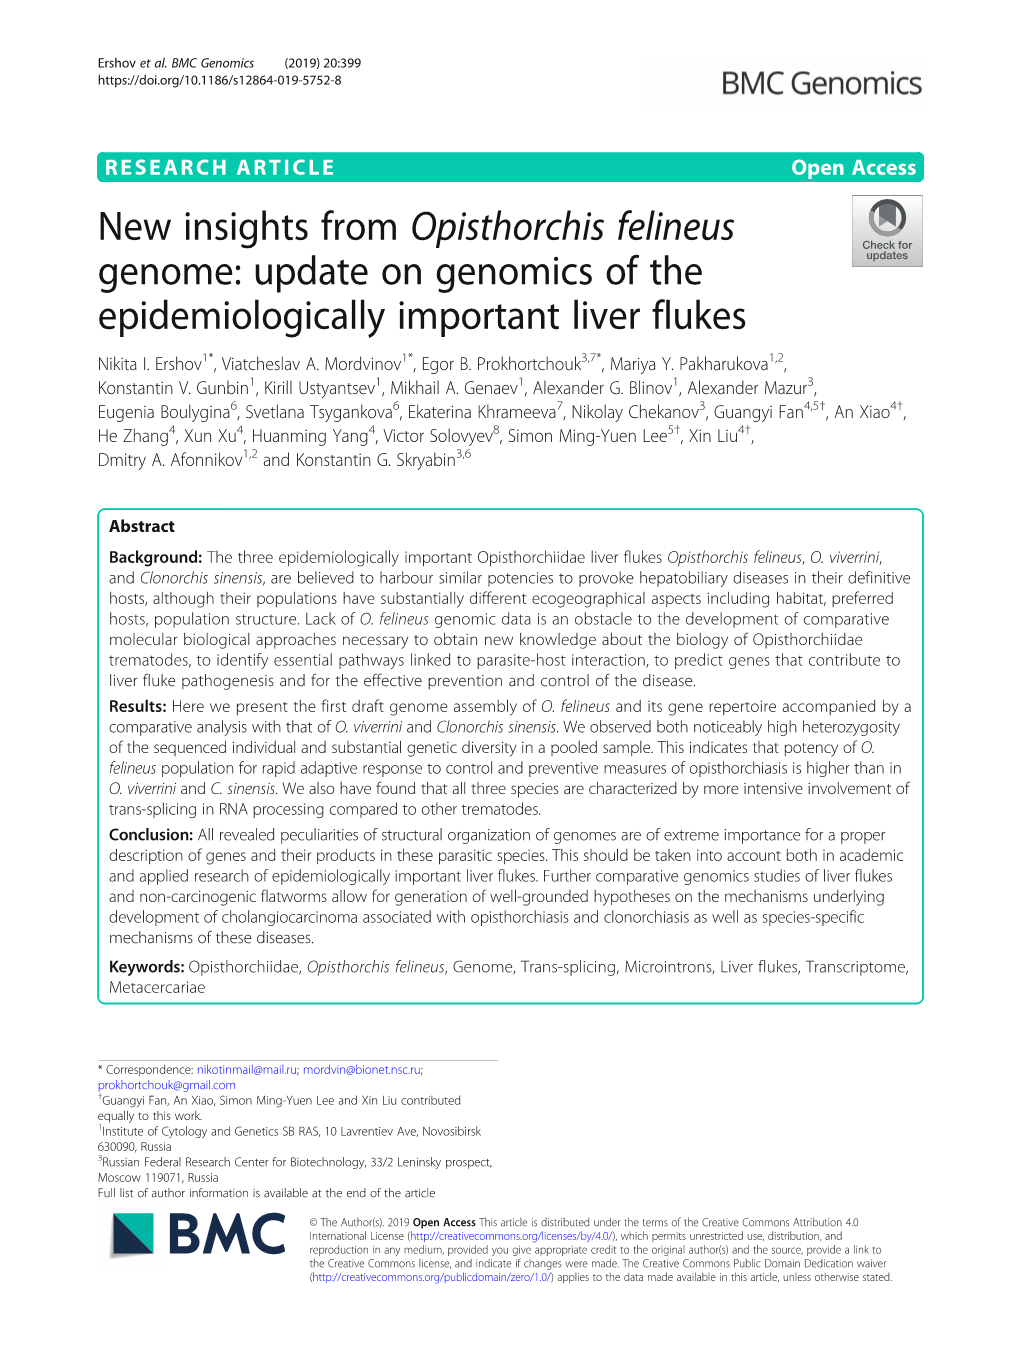 New Insights from Opisthorchis Felineus Genome: Update on Genomics of the Epidemiologically Important Liver Flukes Nikita I